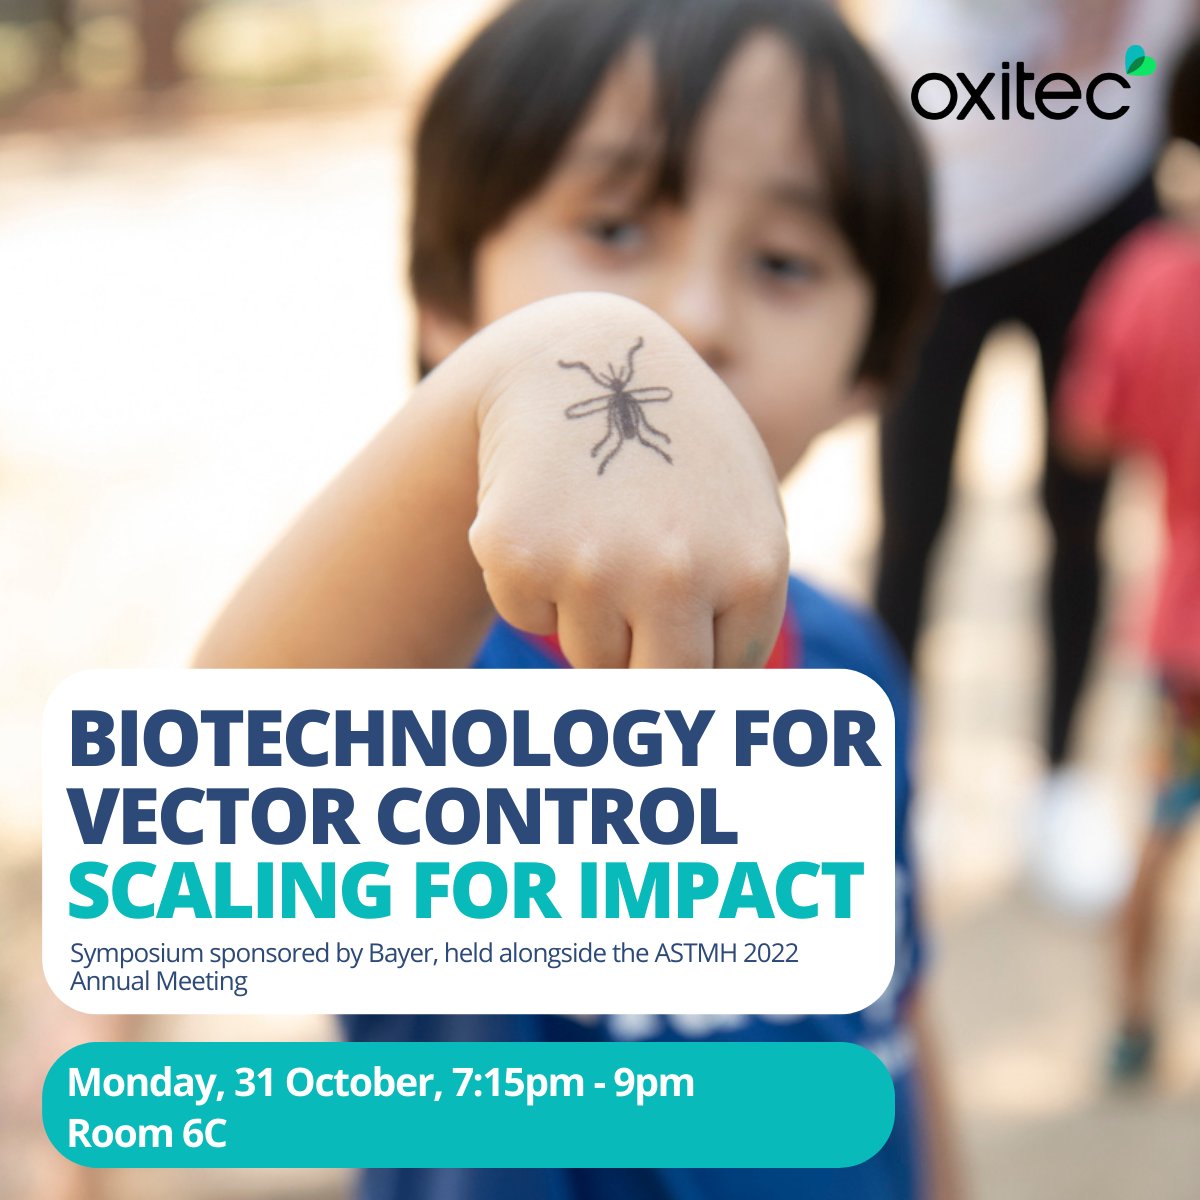 Join #Oxitec’s leadership at our @ASTMH symposium on Monday, 31st October, for a discussion about Friendly™ solutions for #MosquitoControl. 'Biotechnology for Vector Control: Scaling for Impact” Find out more: bit.ly/3Wf1Qyv #ASTMH #ASTMH2022